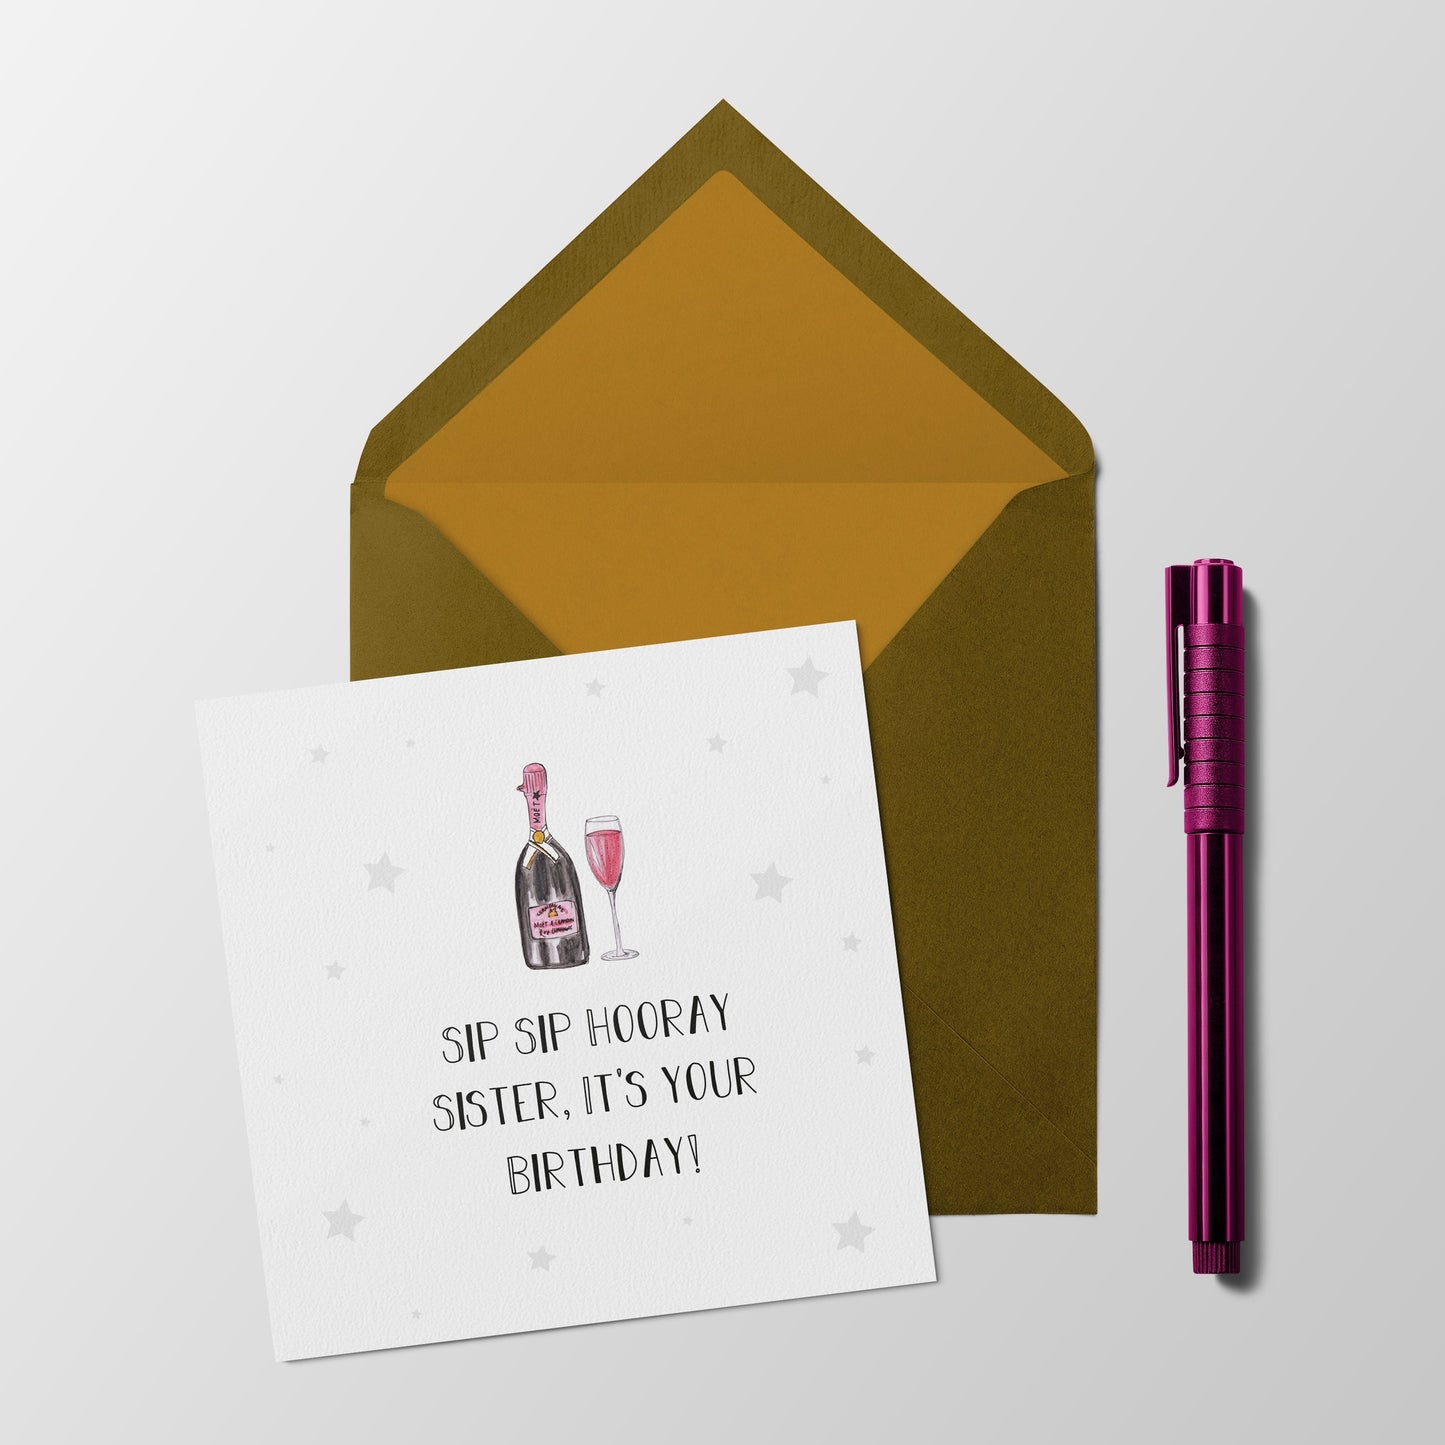 Sip Sip hooray, sister it's your Birthday - rose champagne Birthday card